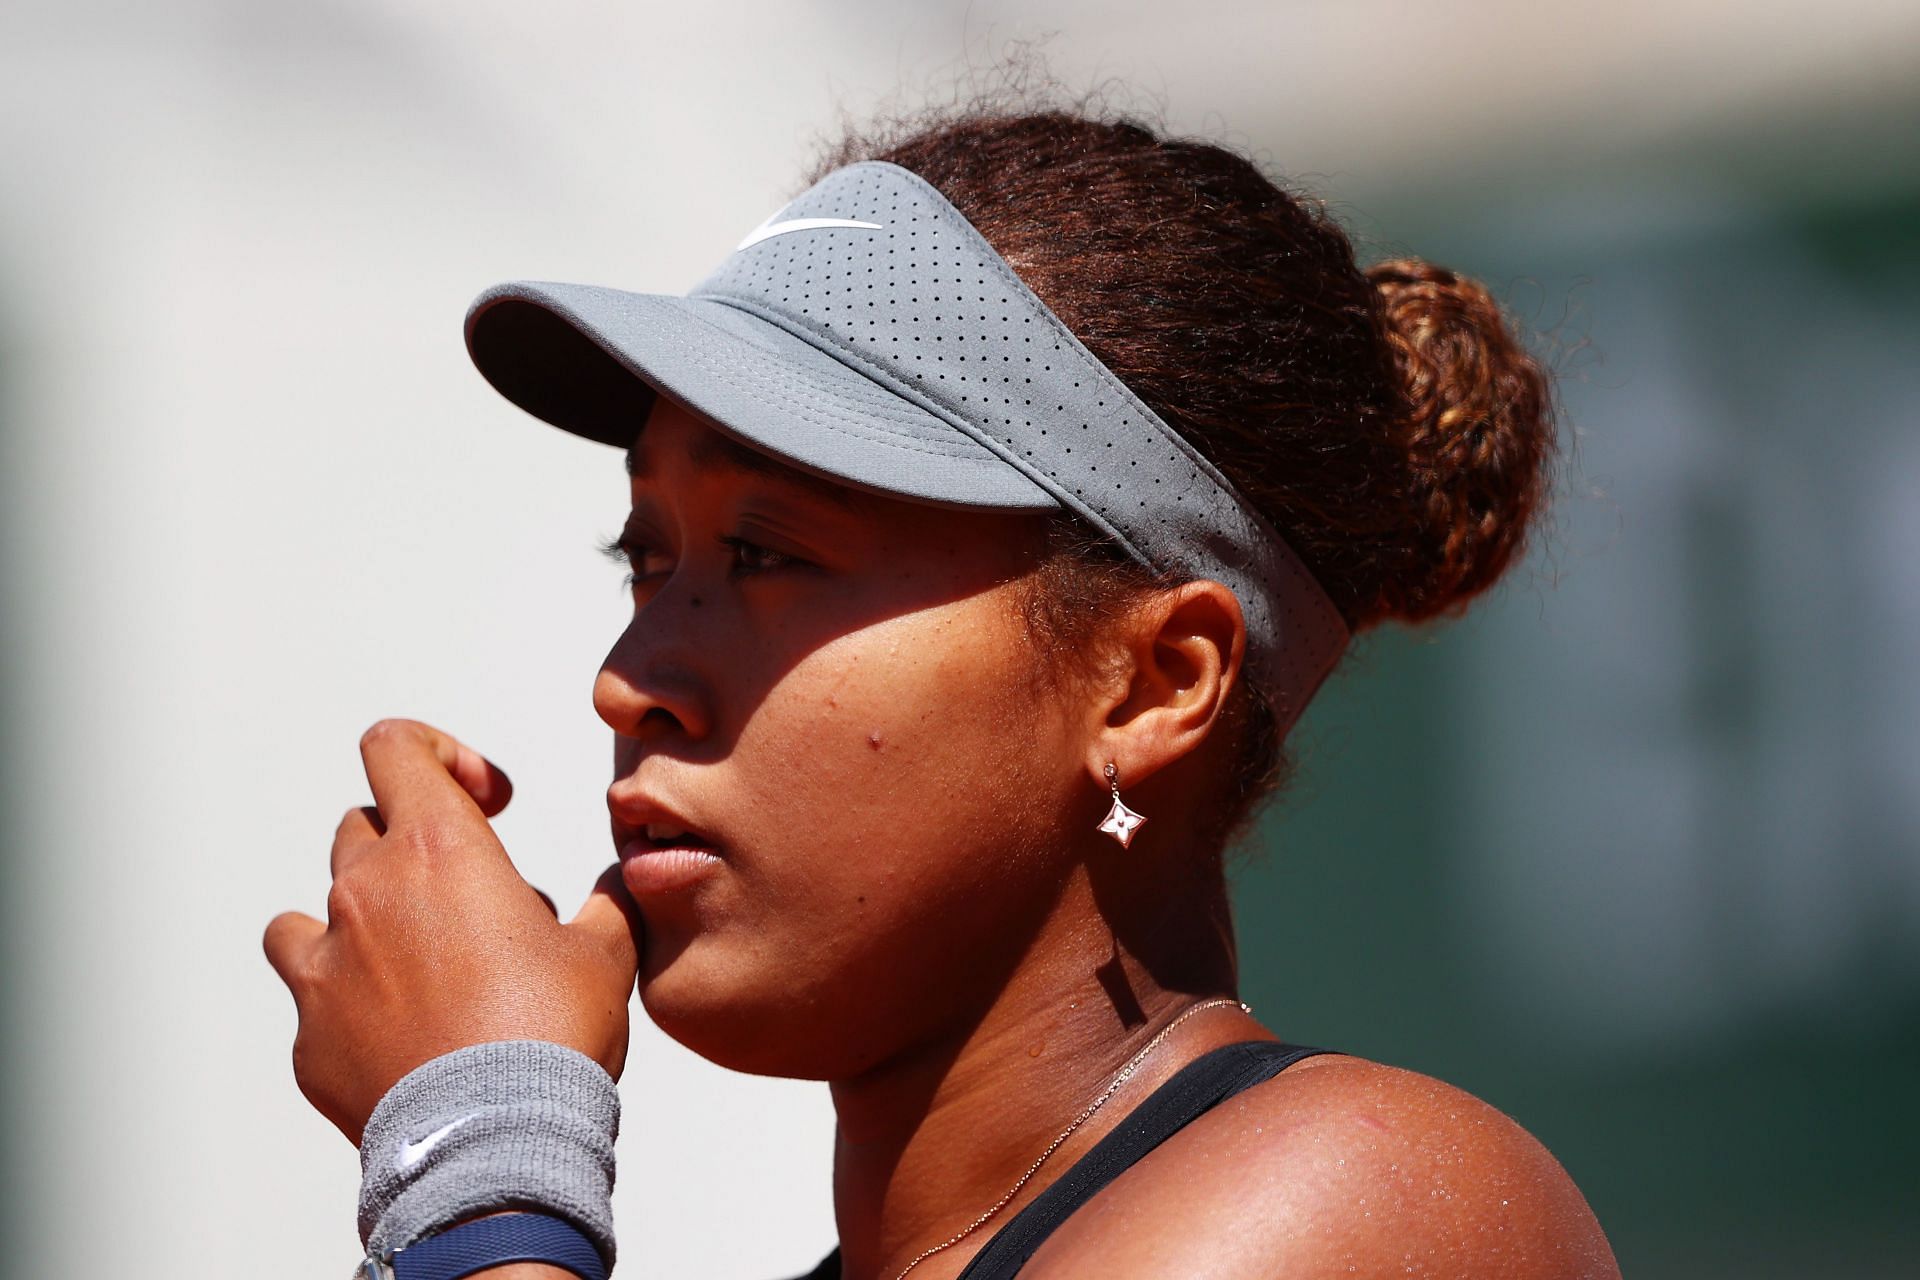 Naomi Osaka in action at the 2021 French Open